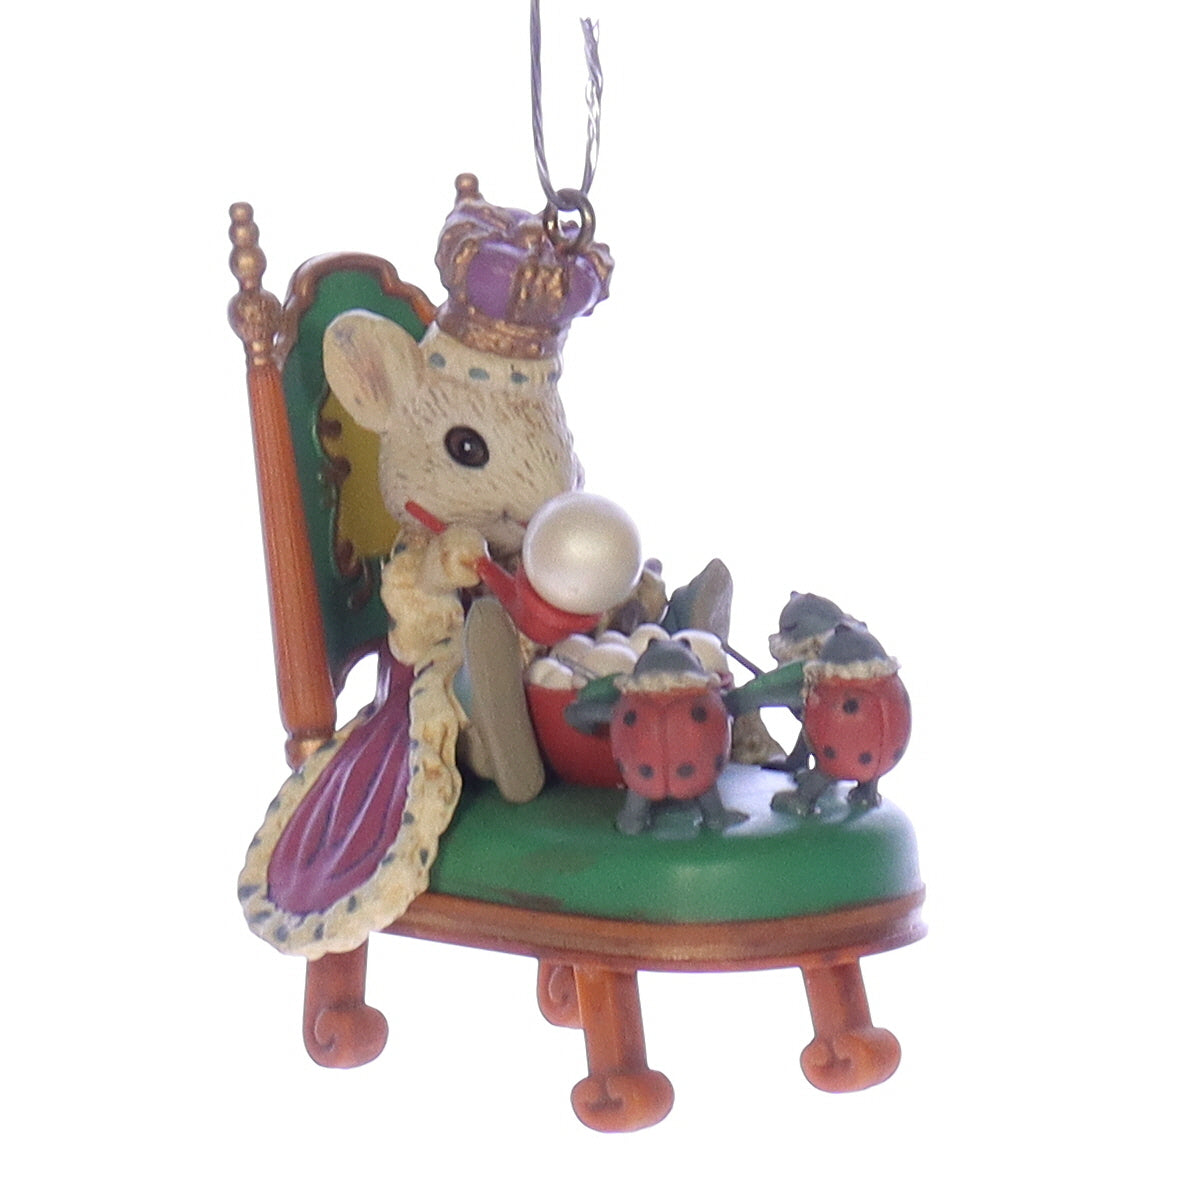 Enesco_Treasury_of_Christmas_Ornaments_575682_Old_King_Cole_Christmas_Ornament_1991 Front Left View